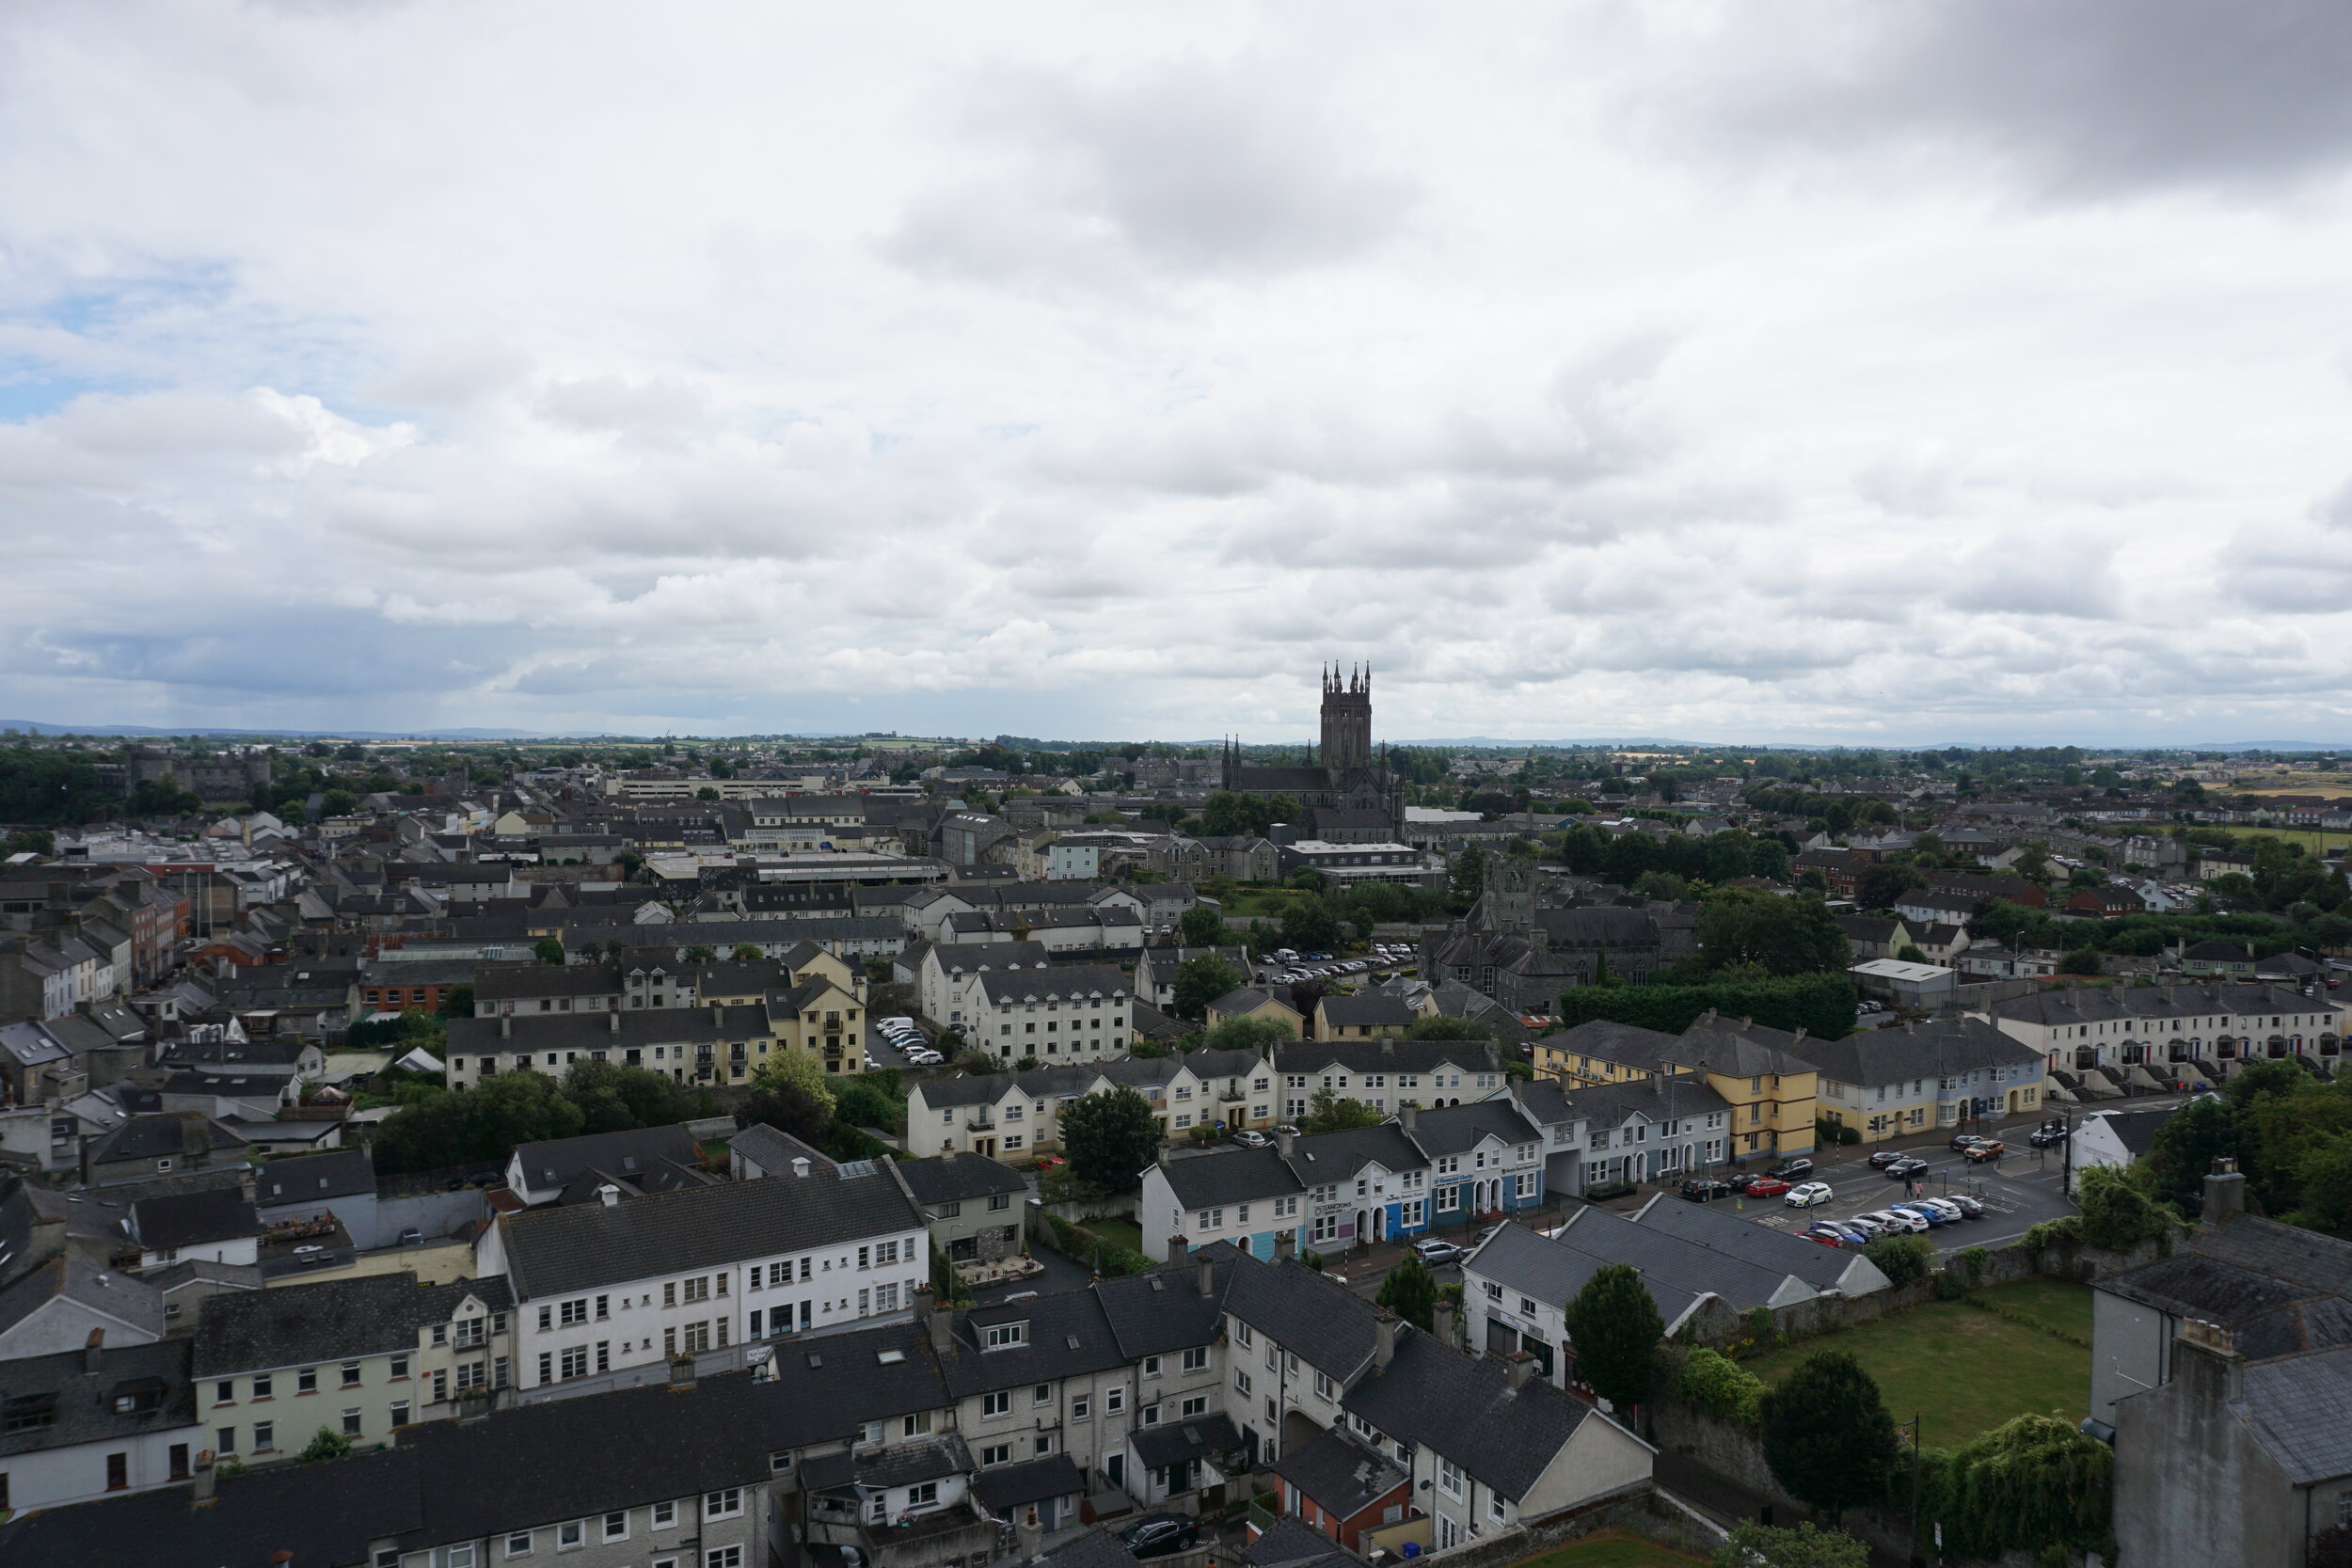 Kilkenny from the top of a 100' watchtower